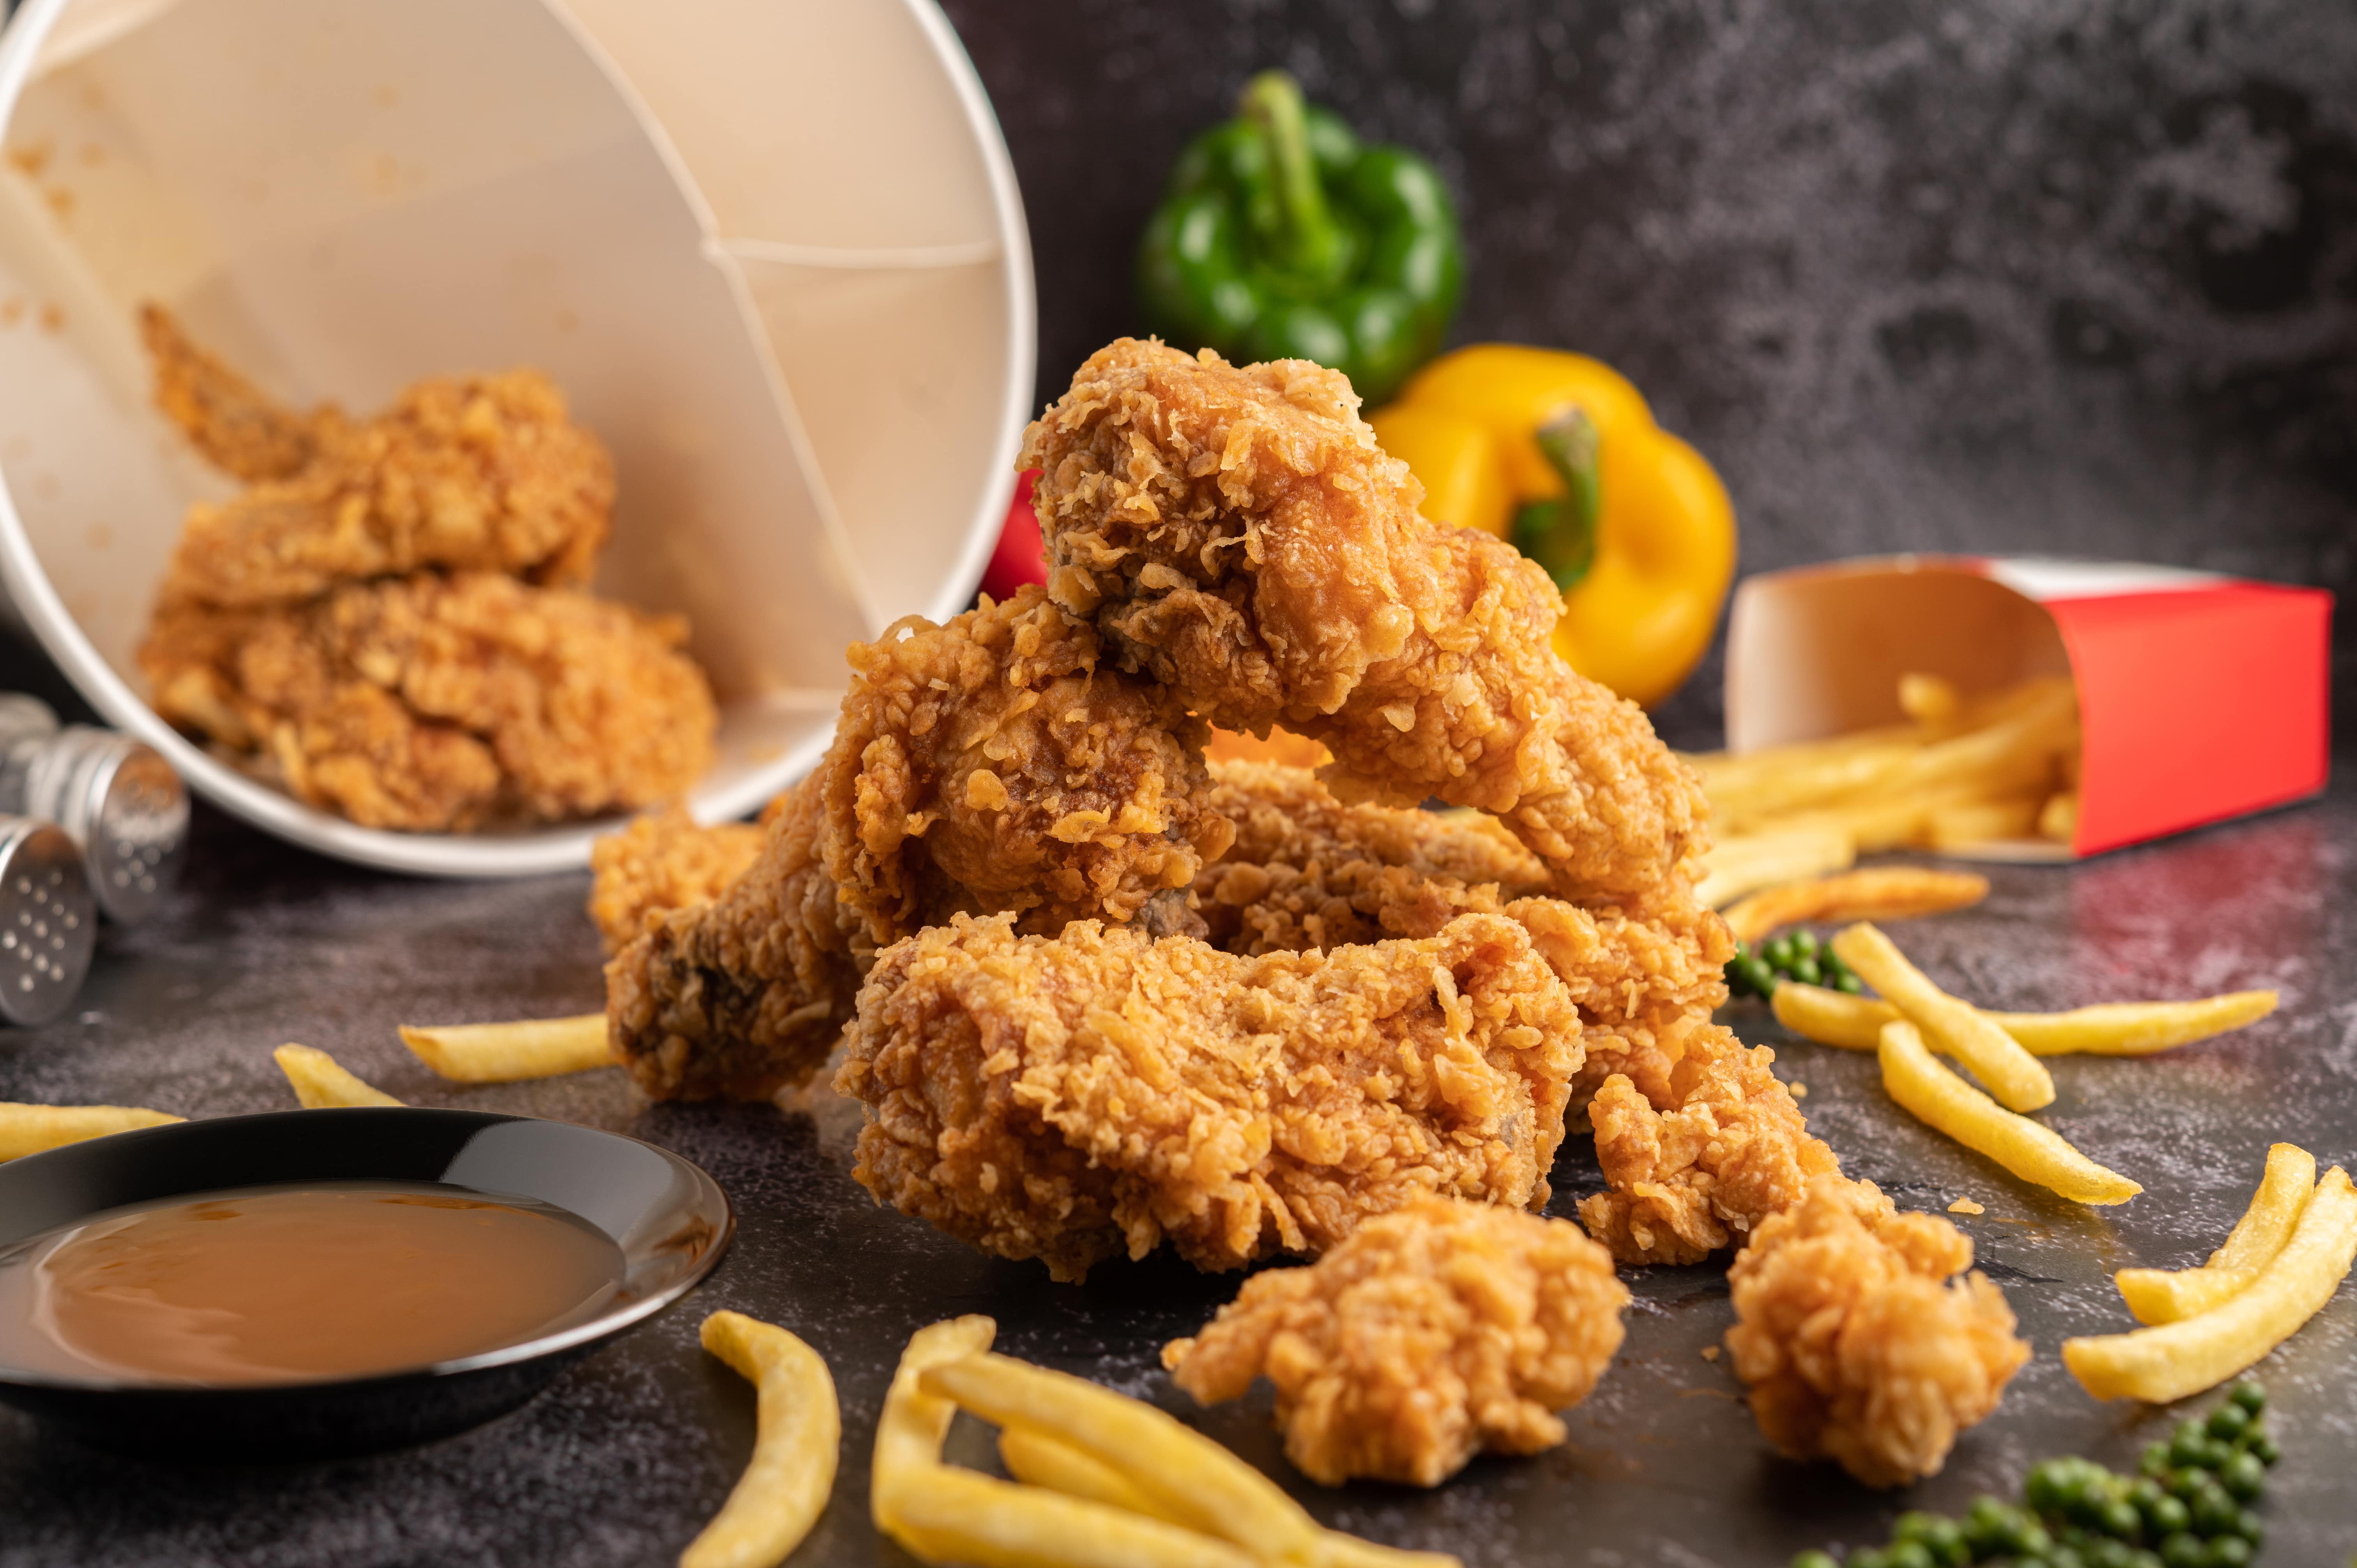 Fried Chicken and Comfort Food Culture